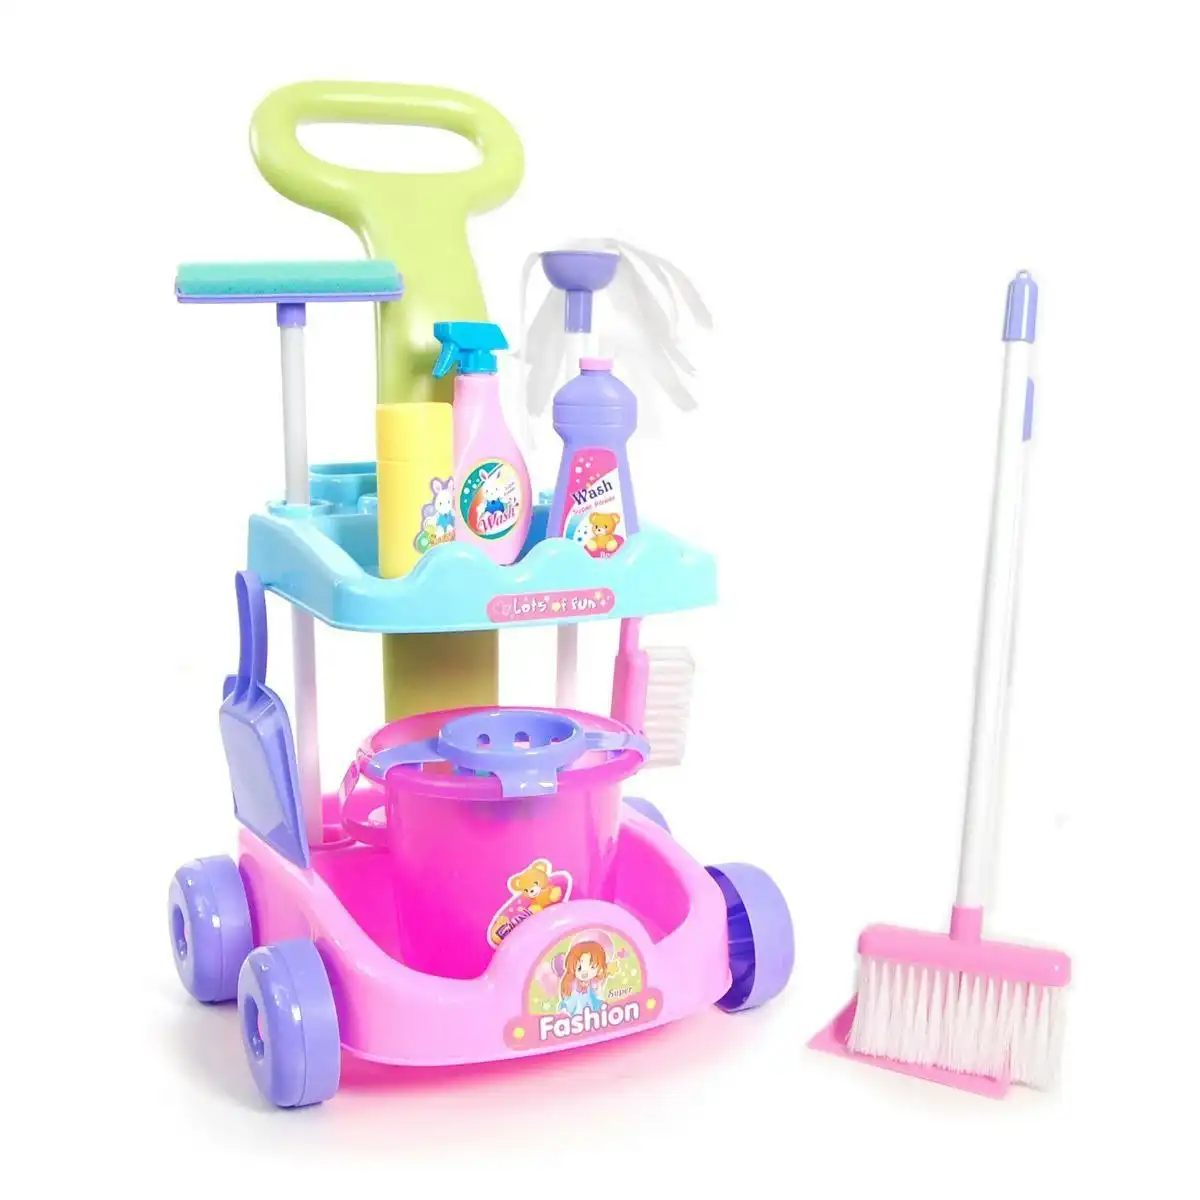 Ausway Multi Coloured Cleaning Trolley Kids Cleaner Play Set with Accessories